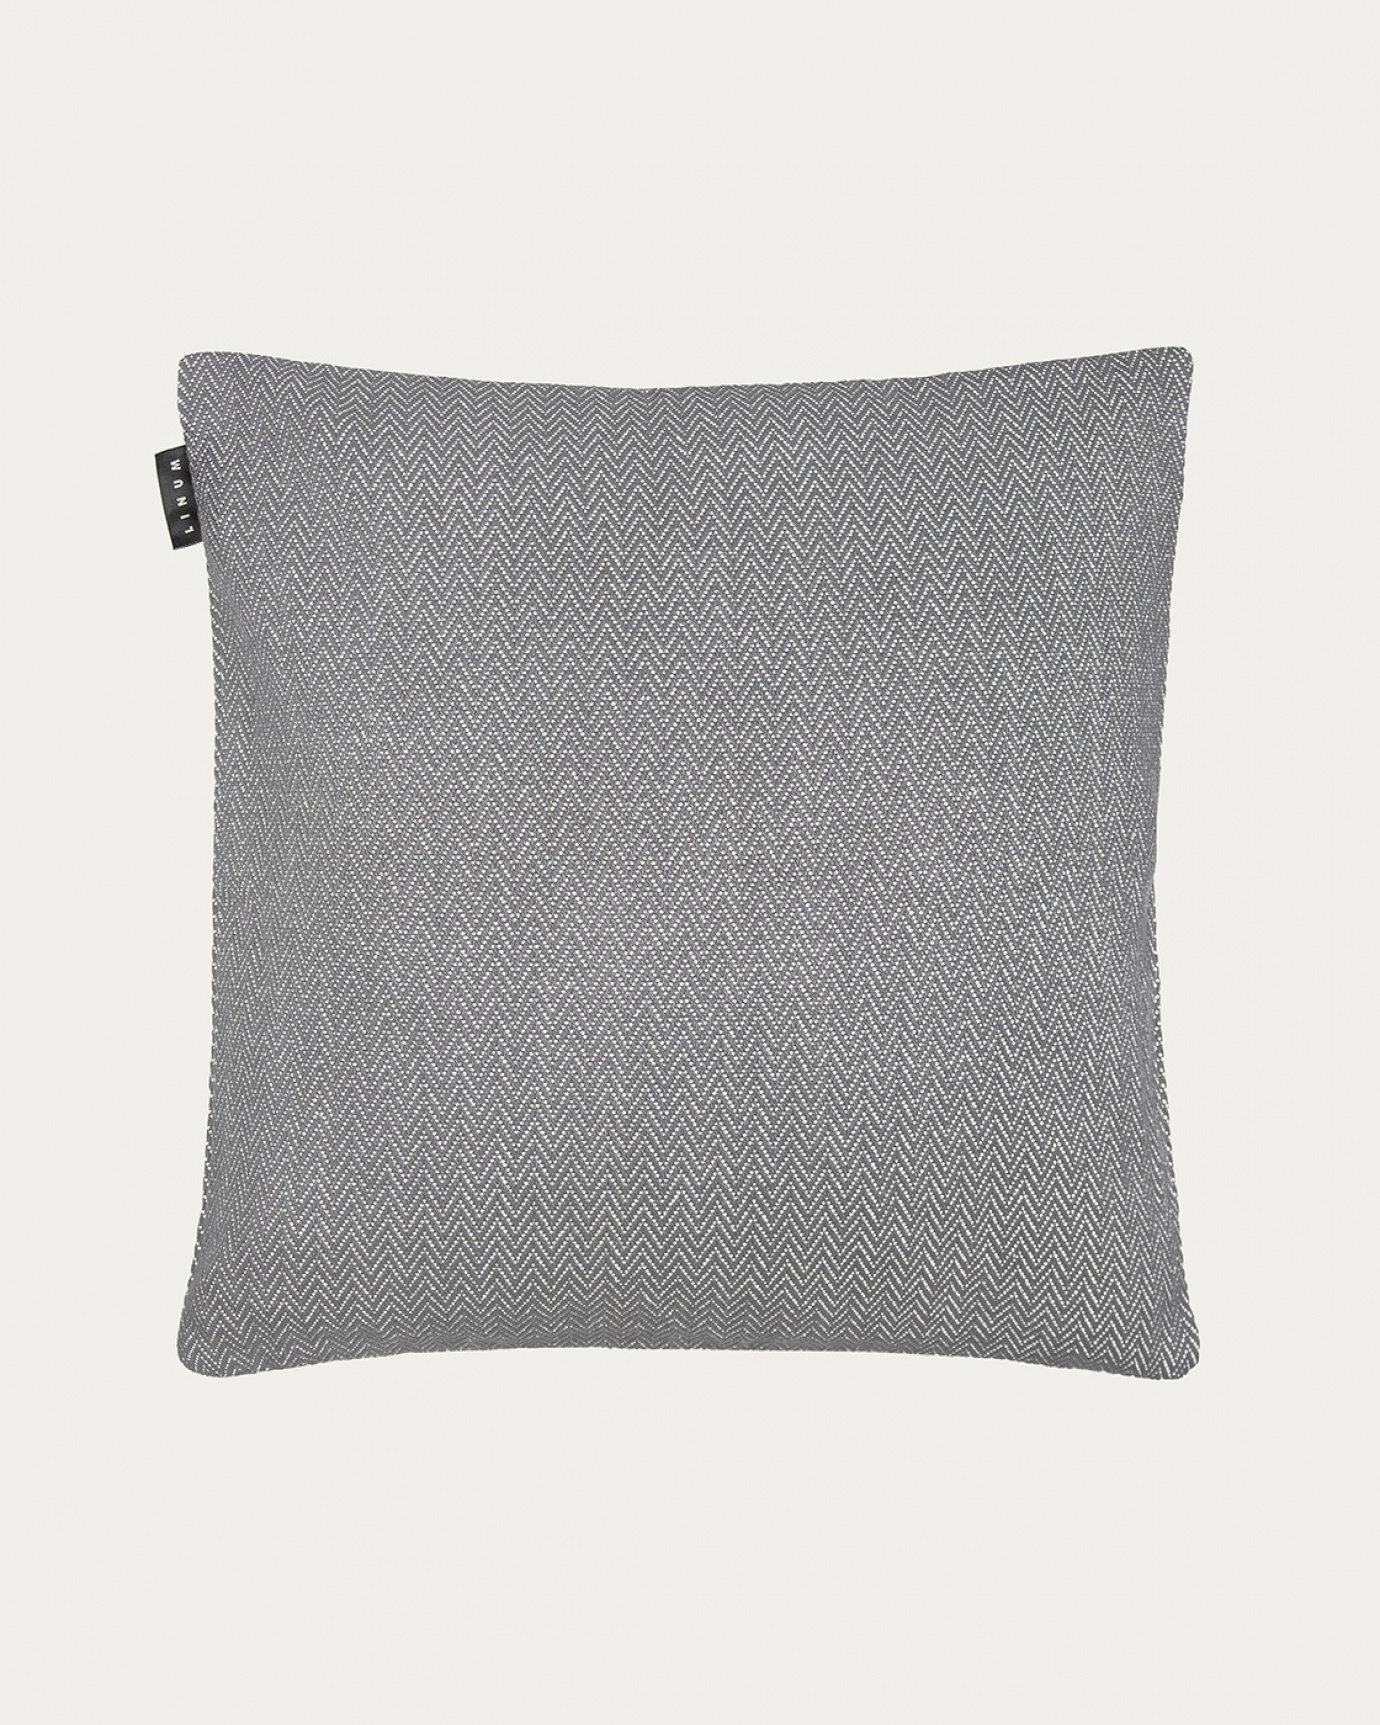 Product image granite grey SHEPARD cushion cover made of soft cotton with a discreet herringbone pattern from LINUM DESIGN. Size 50x50 cm.